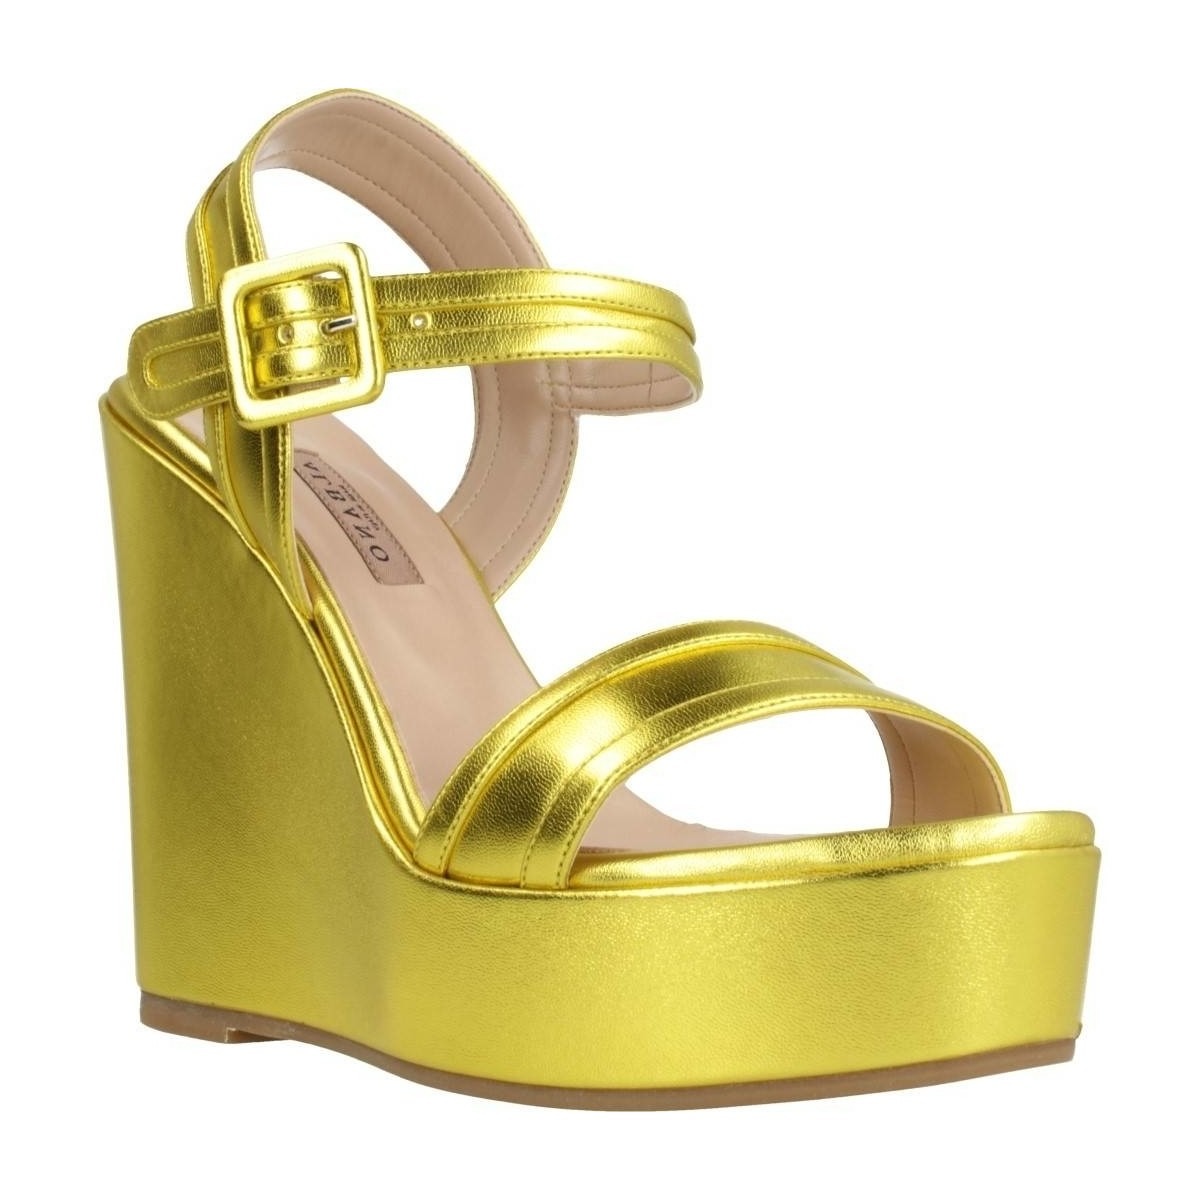 Albano Gold Sandals for Woman from Spartoo GOOFASH